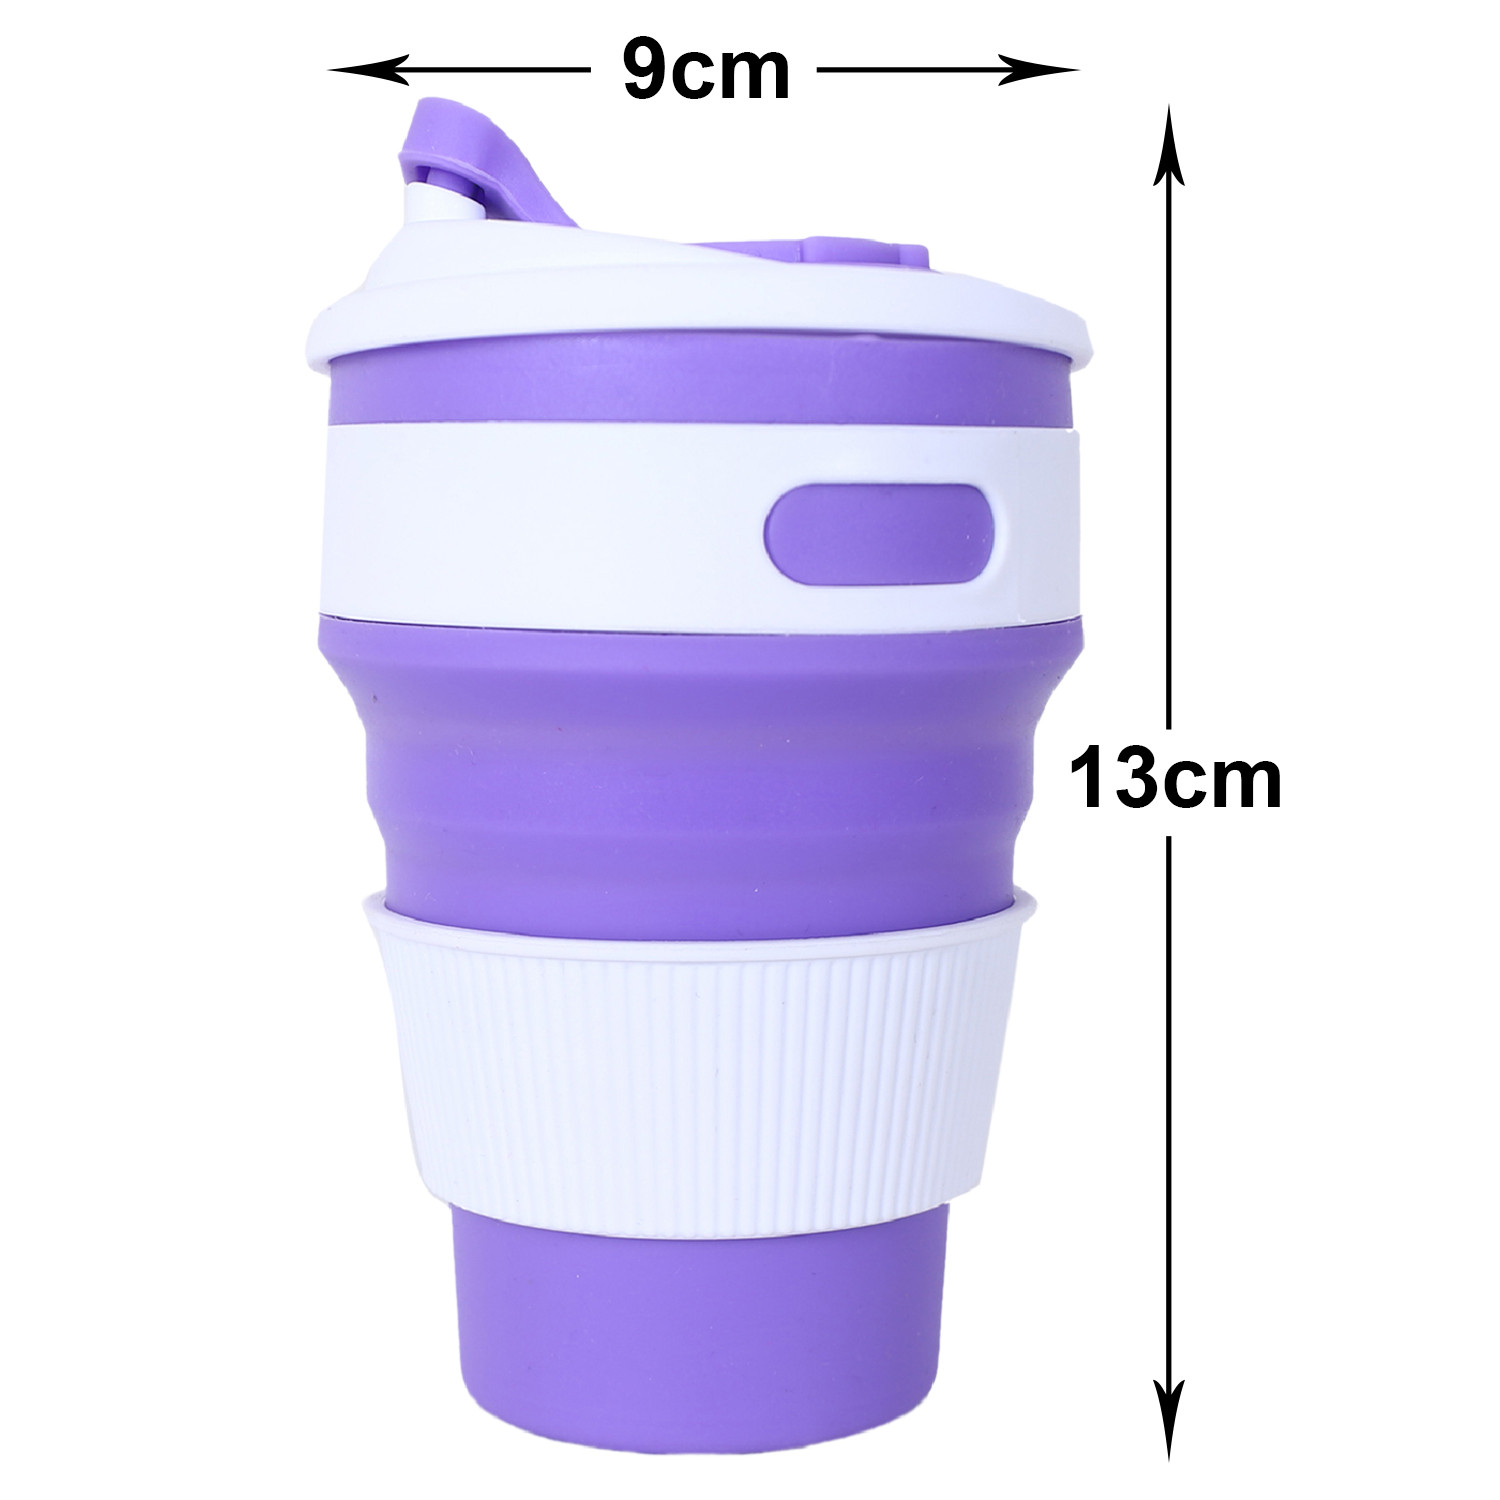 Kuber Industries Collapsible Coffee Cup|Silicone Portable Travel Coffee Mug|Camping Cup with Lid for Travel,Hiking Outdoors,350 ML,(Purple)